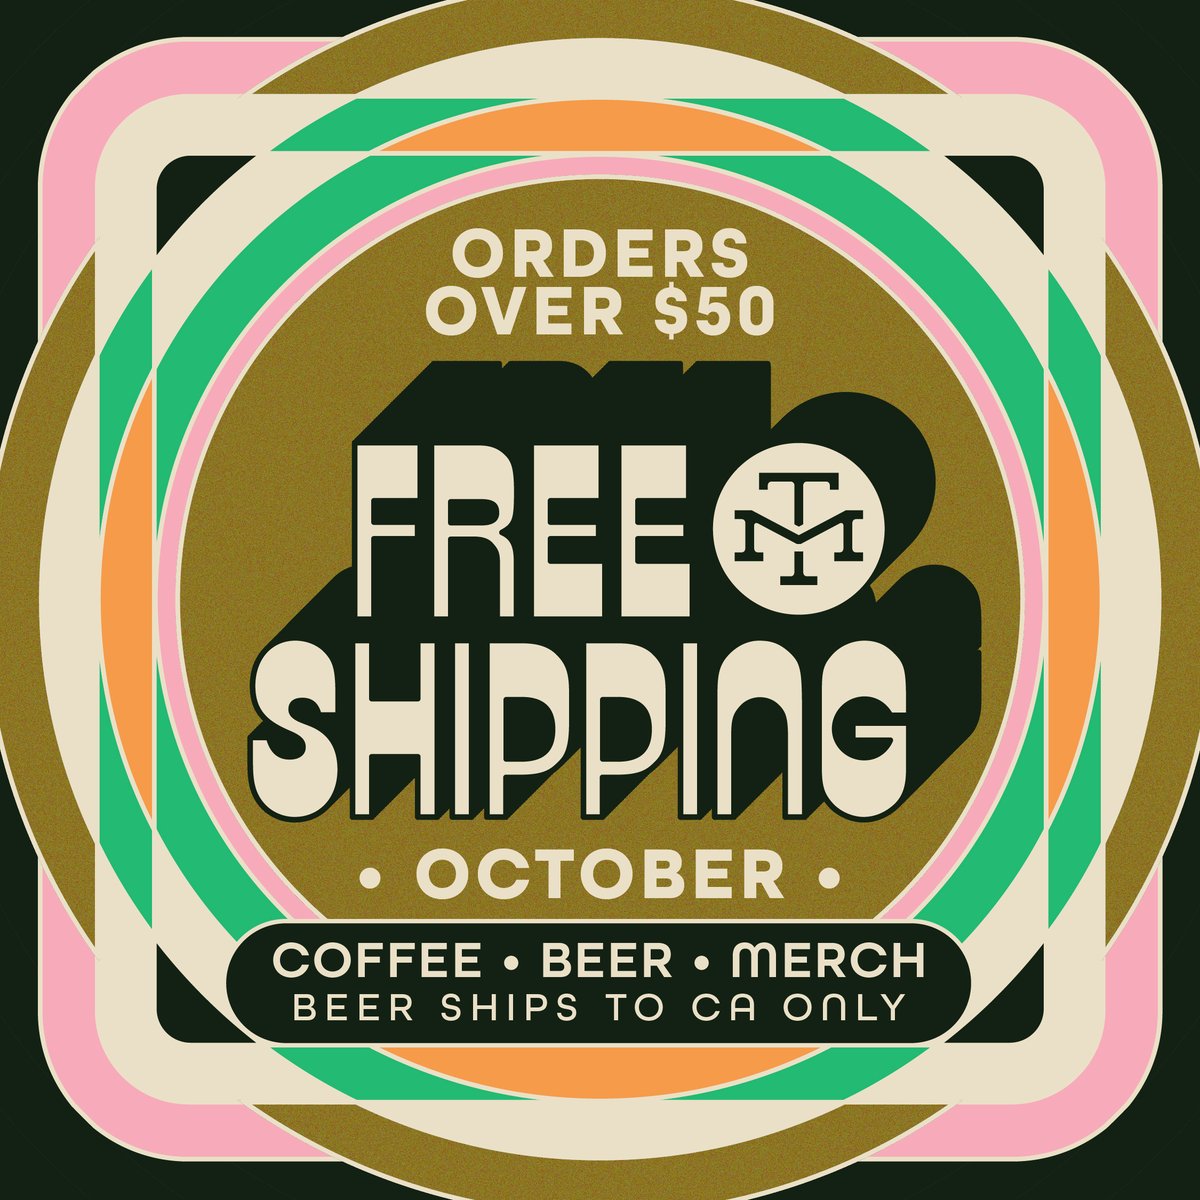 Now through the month of October, all online orders over $50 get FREE SHIPPING. Beer*, coffee, apparel, glassware—the whole shebang. You can get in on it now via our online store here: bit.ly/3y6z2xr - *Free shipping on beer for CA residents only.